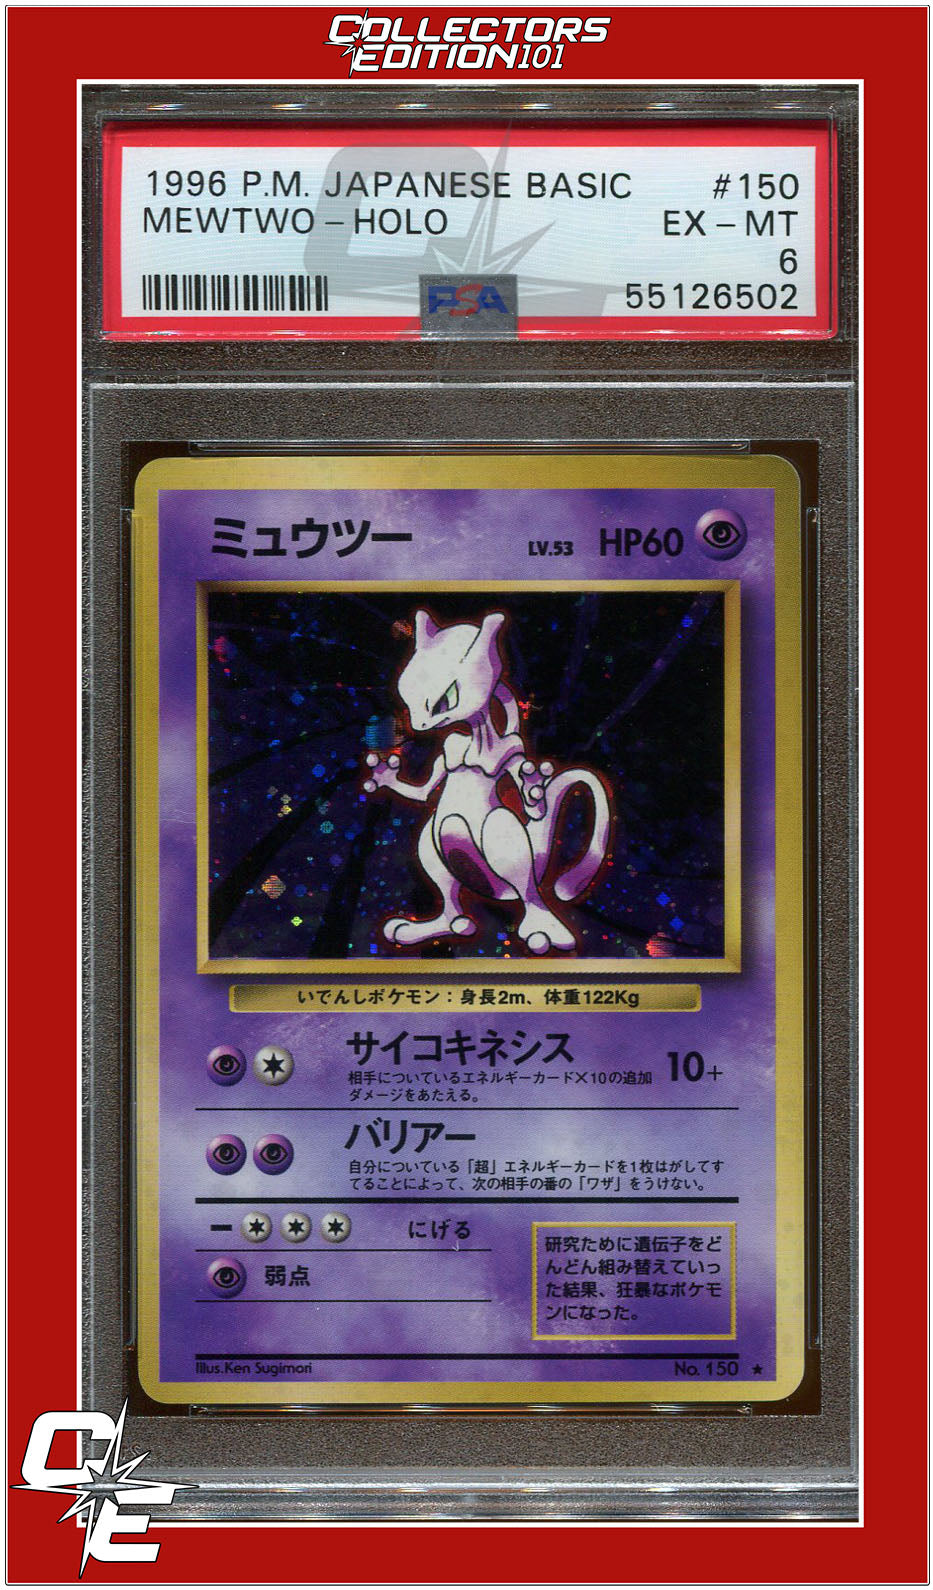 Japanese Basic 150 Mewtwo Holo PSA 6 | Collectors Edition 101